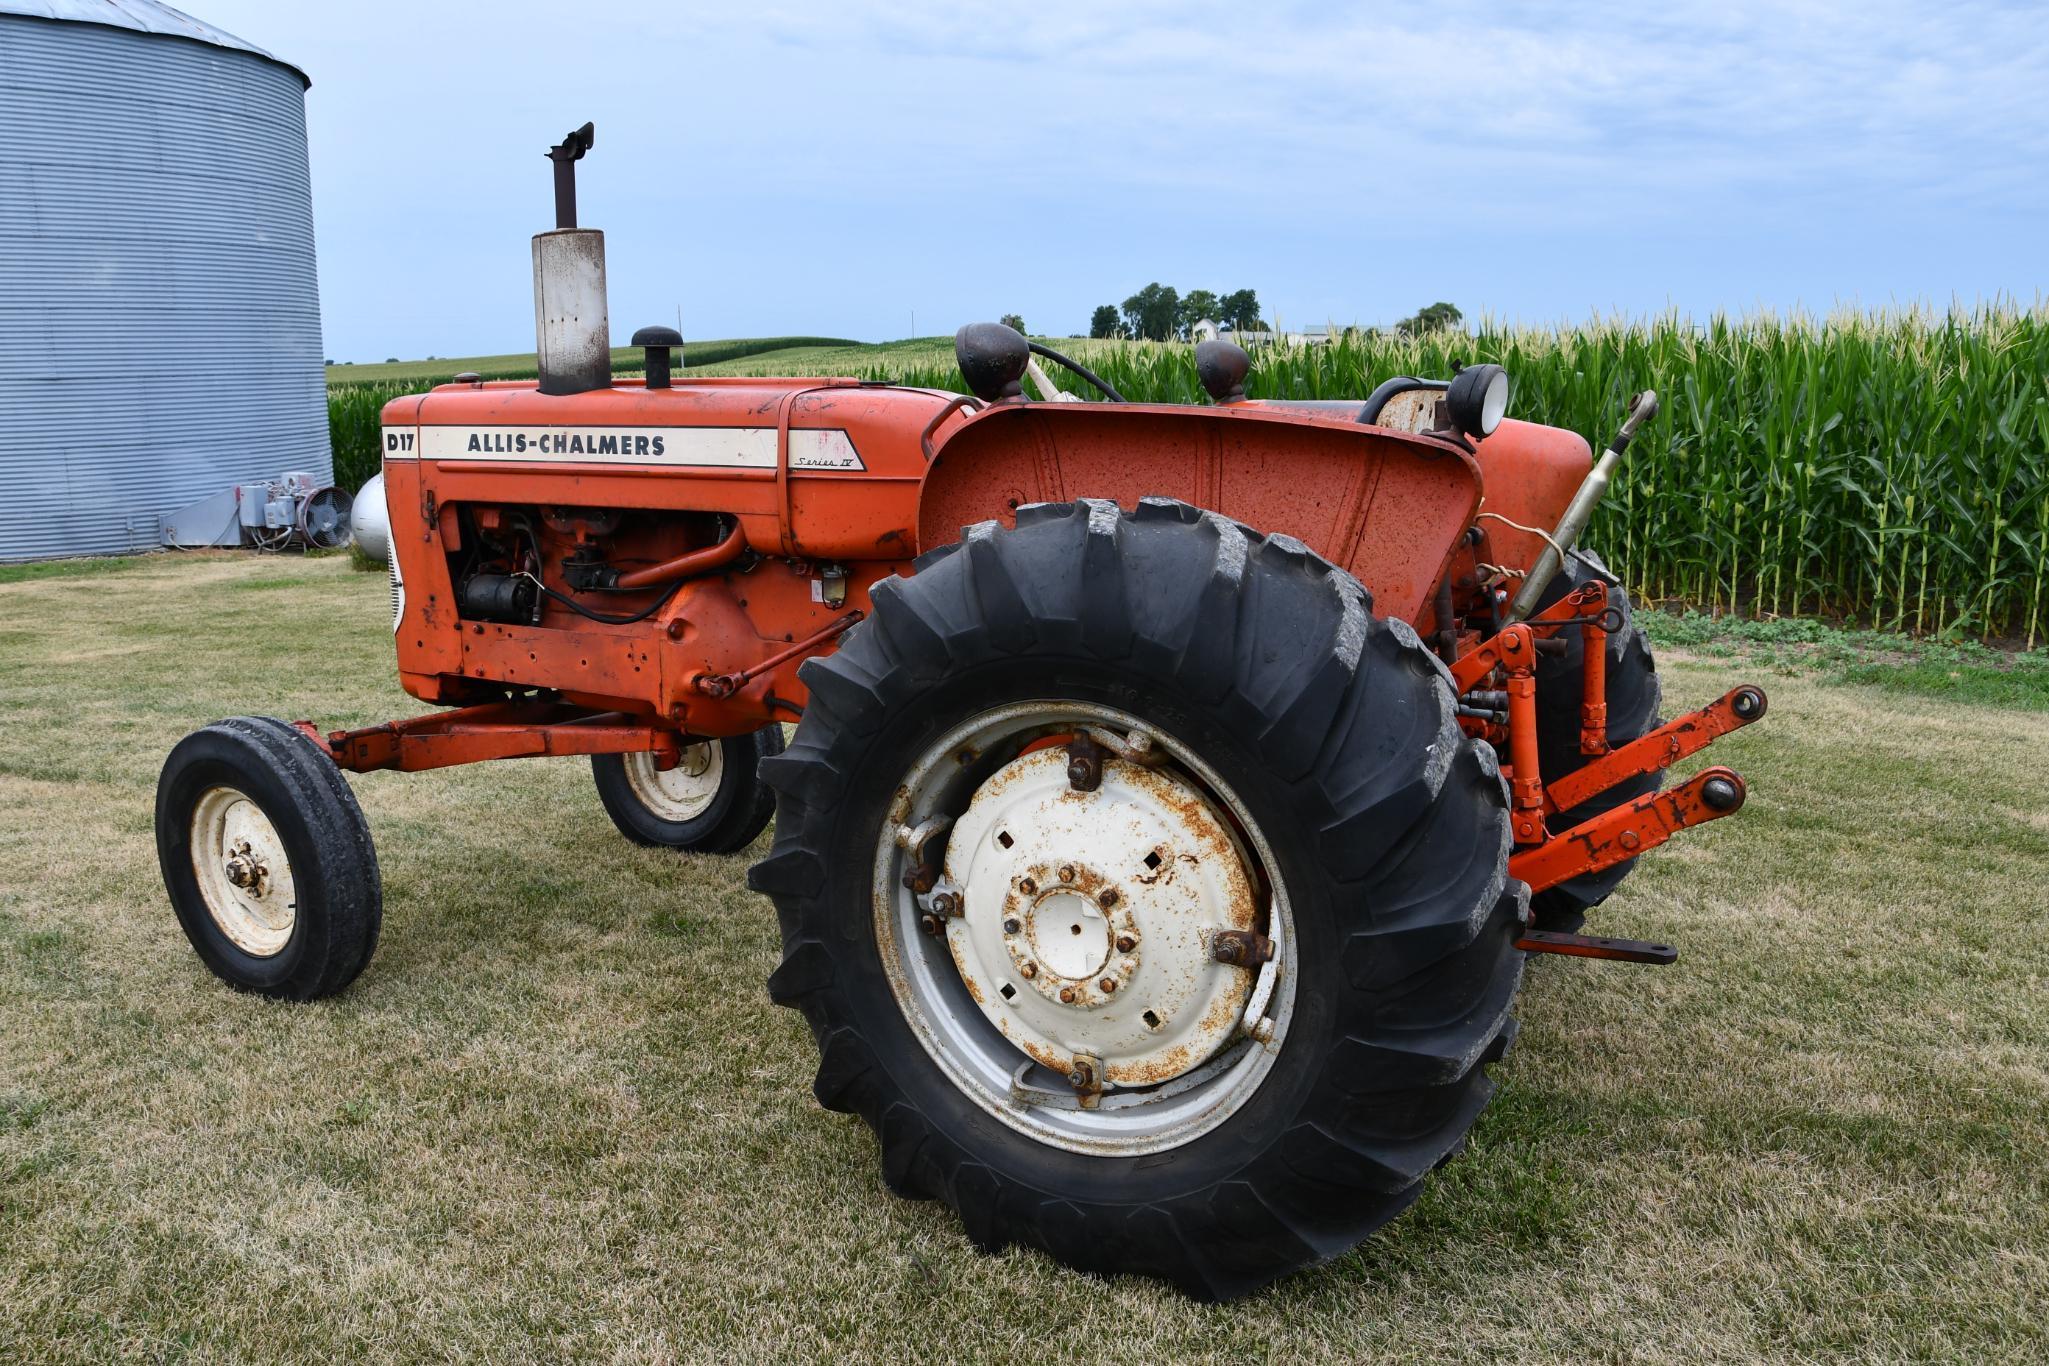 1965 Allis Chalmers D-17 tractor